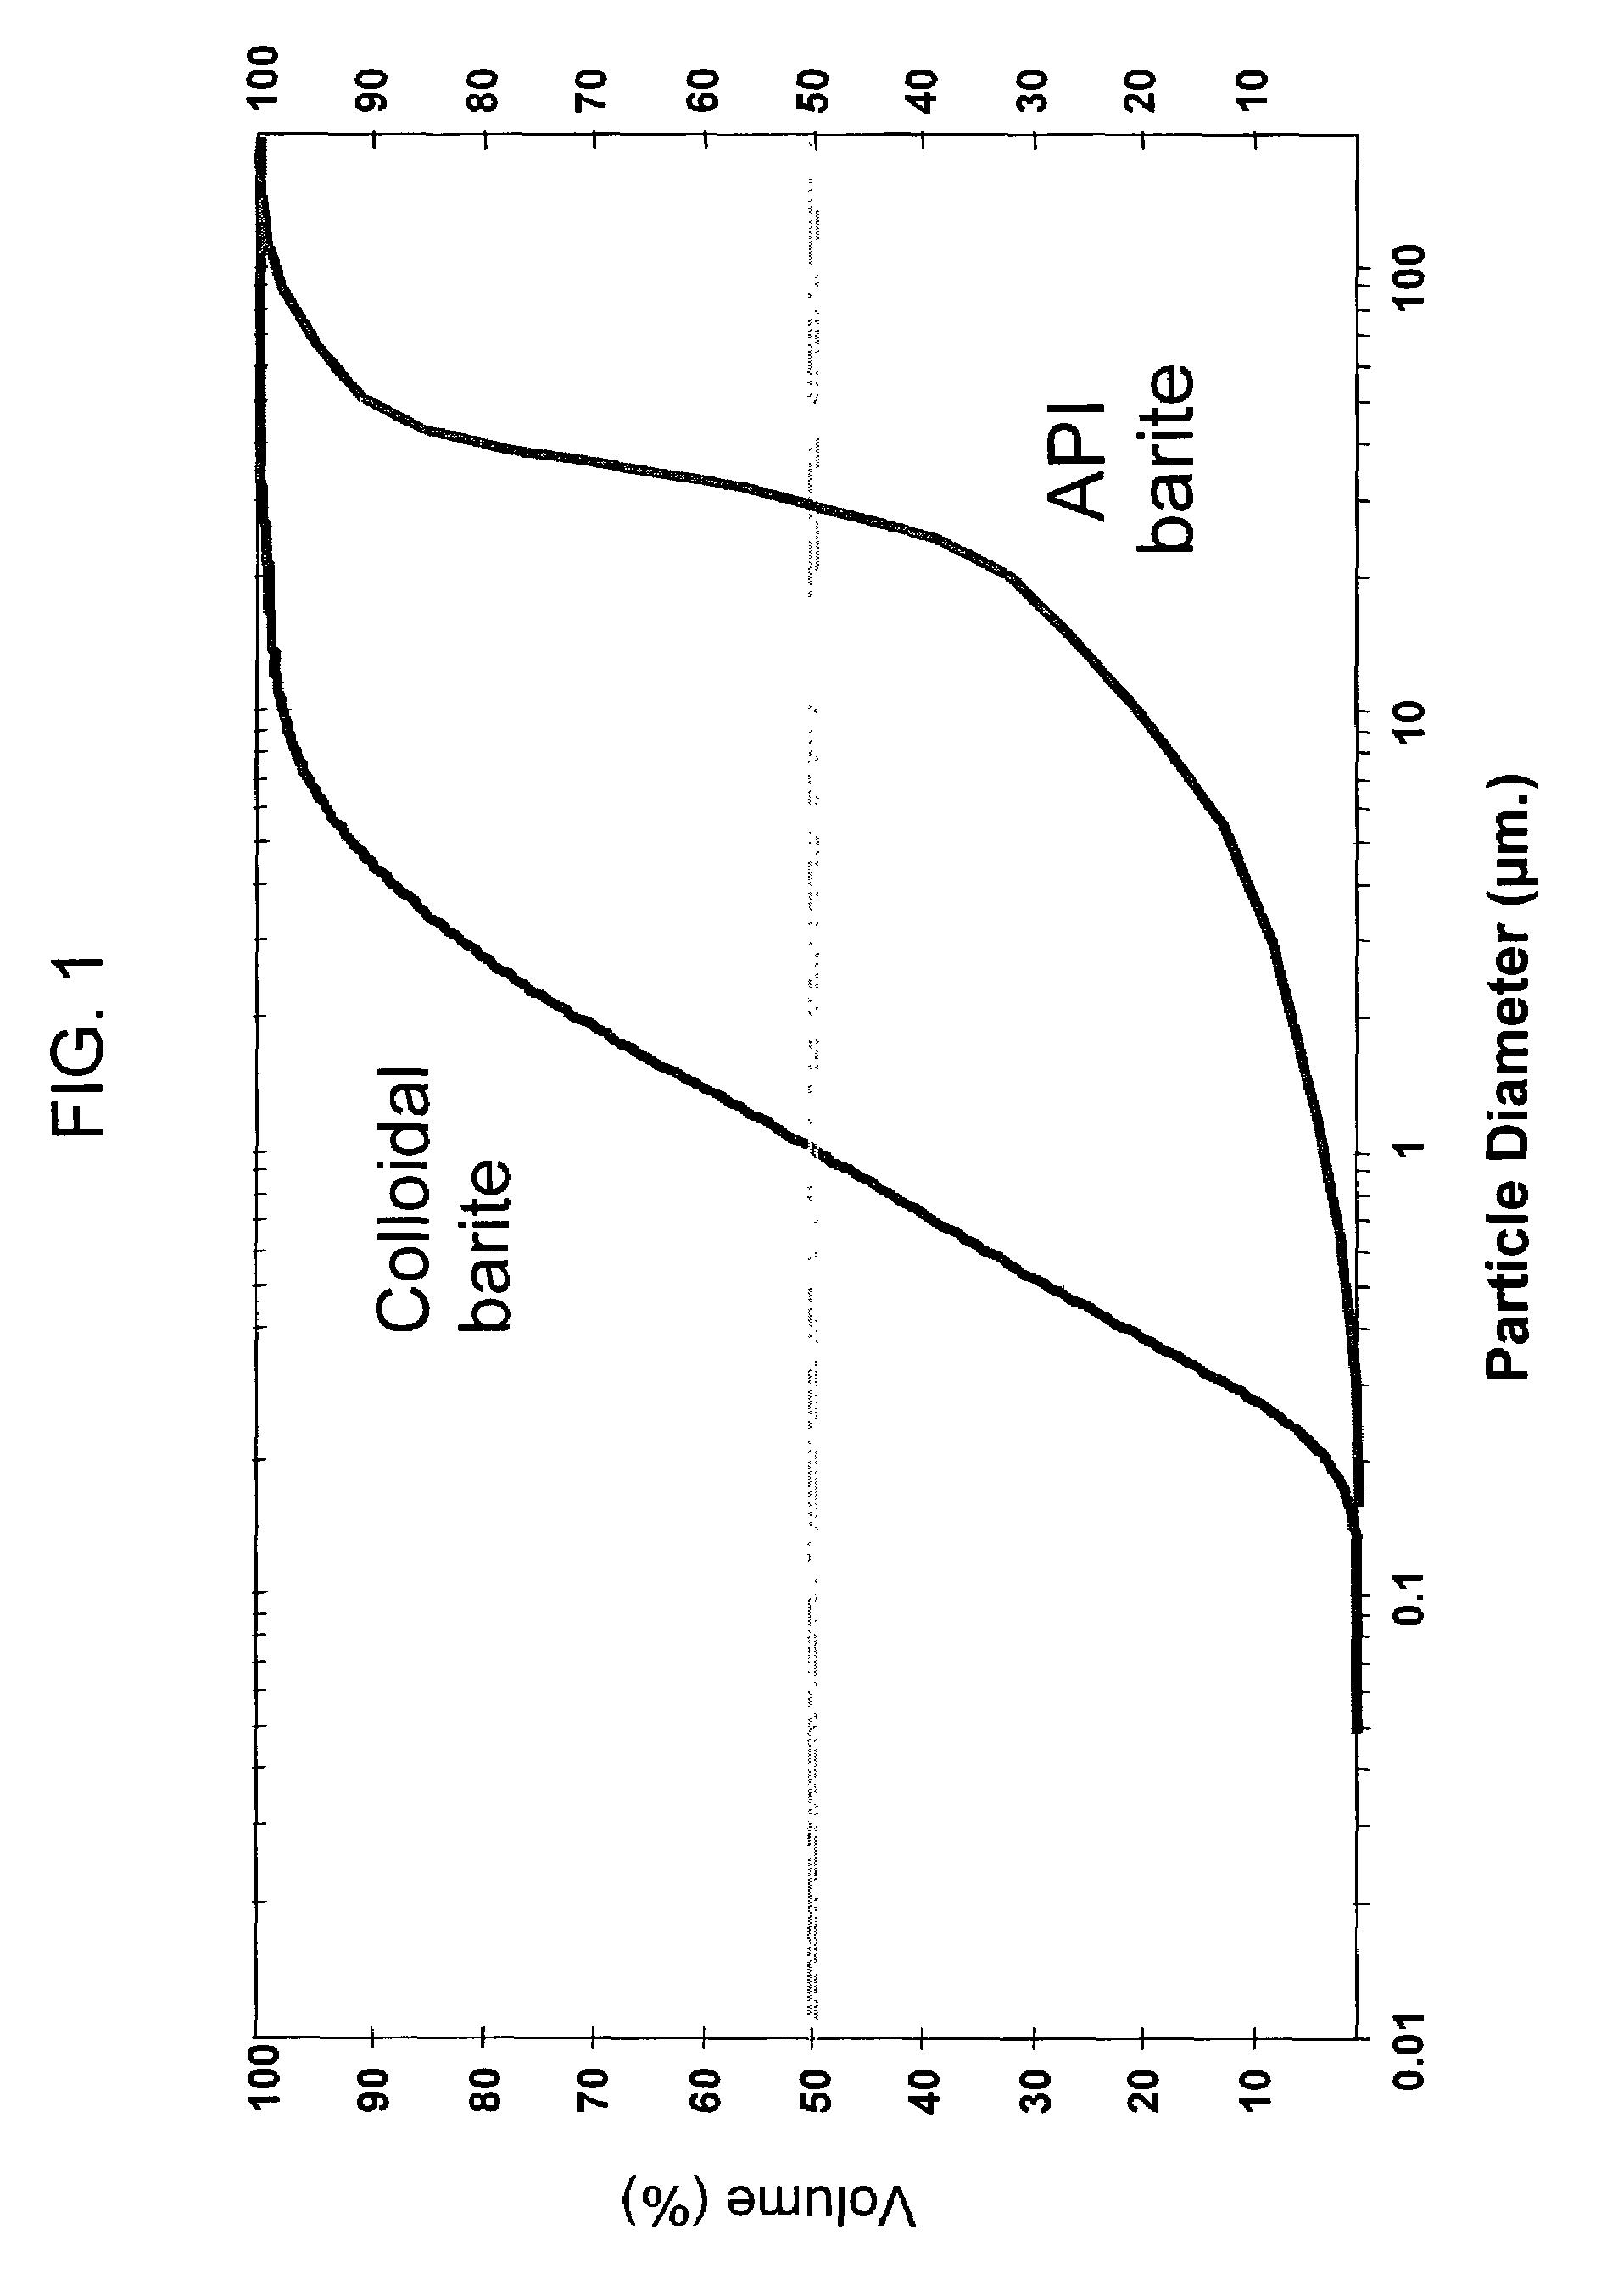 Additive for increasing the density of a fluid for casing annulus pressure